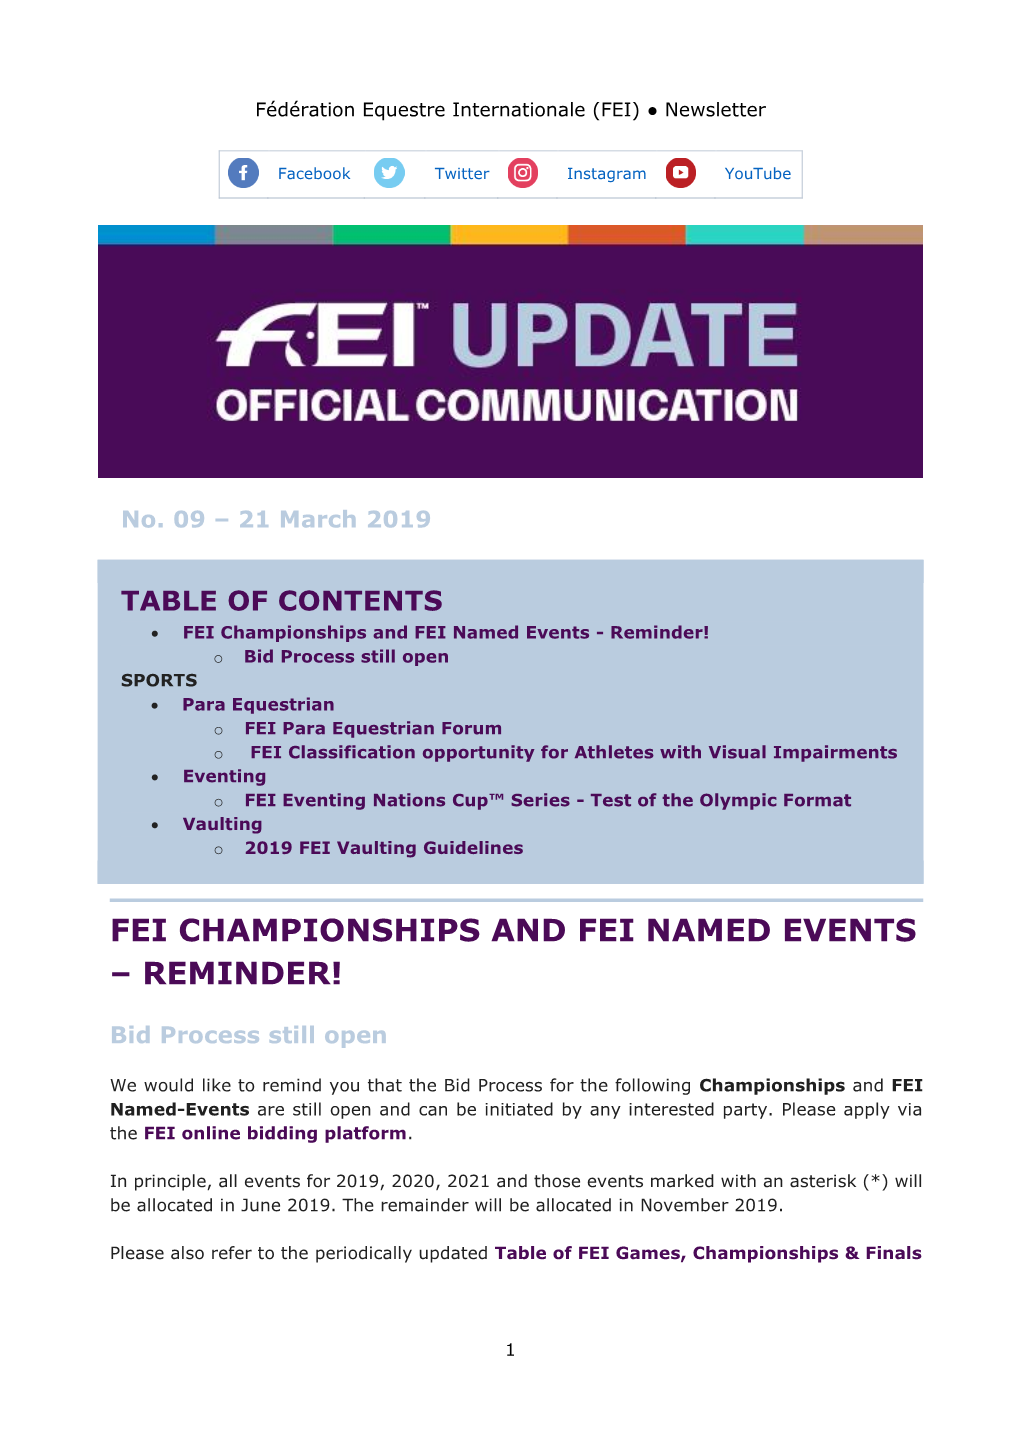 Fei Championships and Fei Named Events – Reminder!